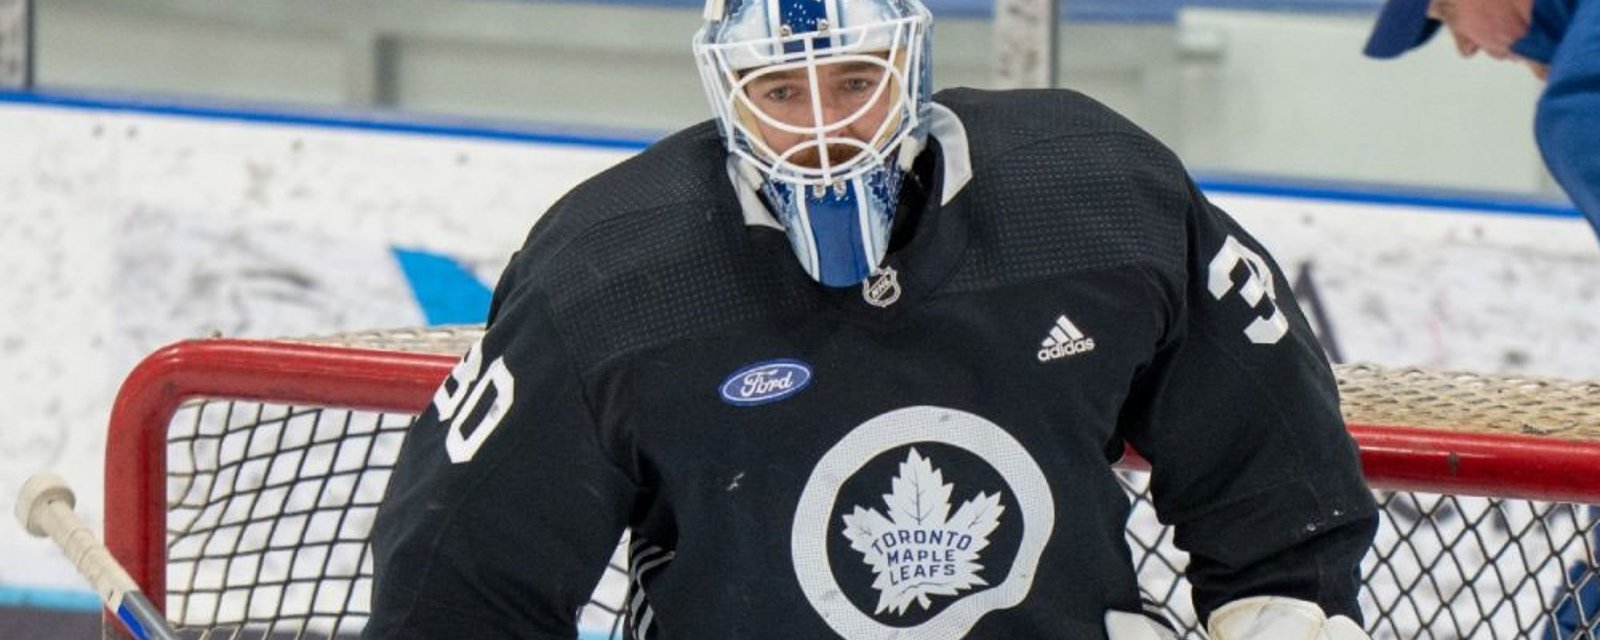 Potential for disaster in Leafs' goalie crease with latest update on Matt Murray